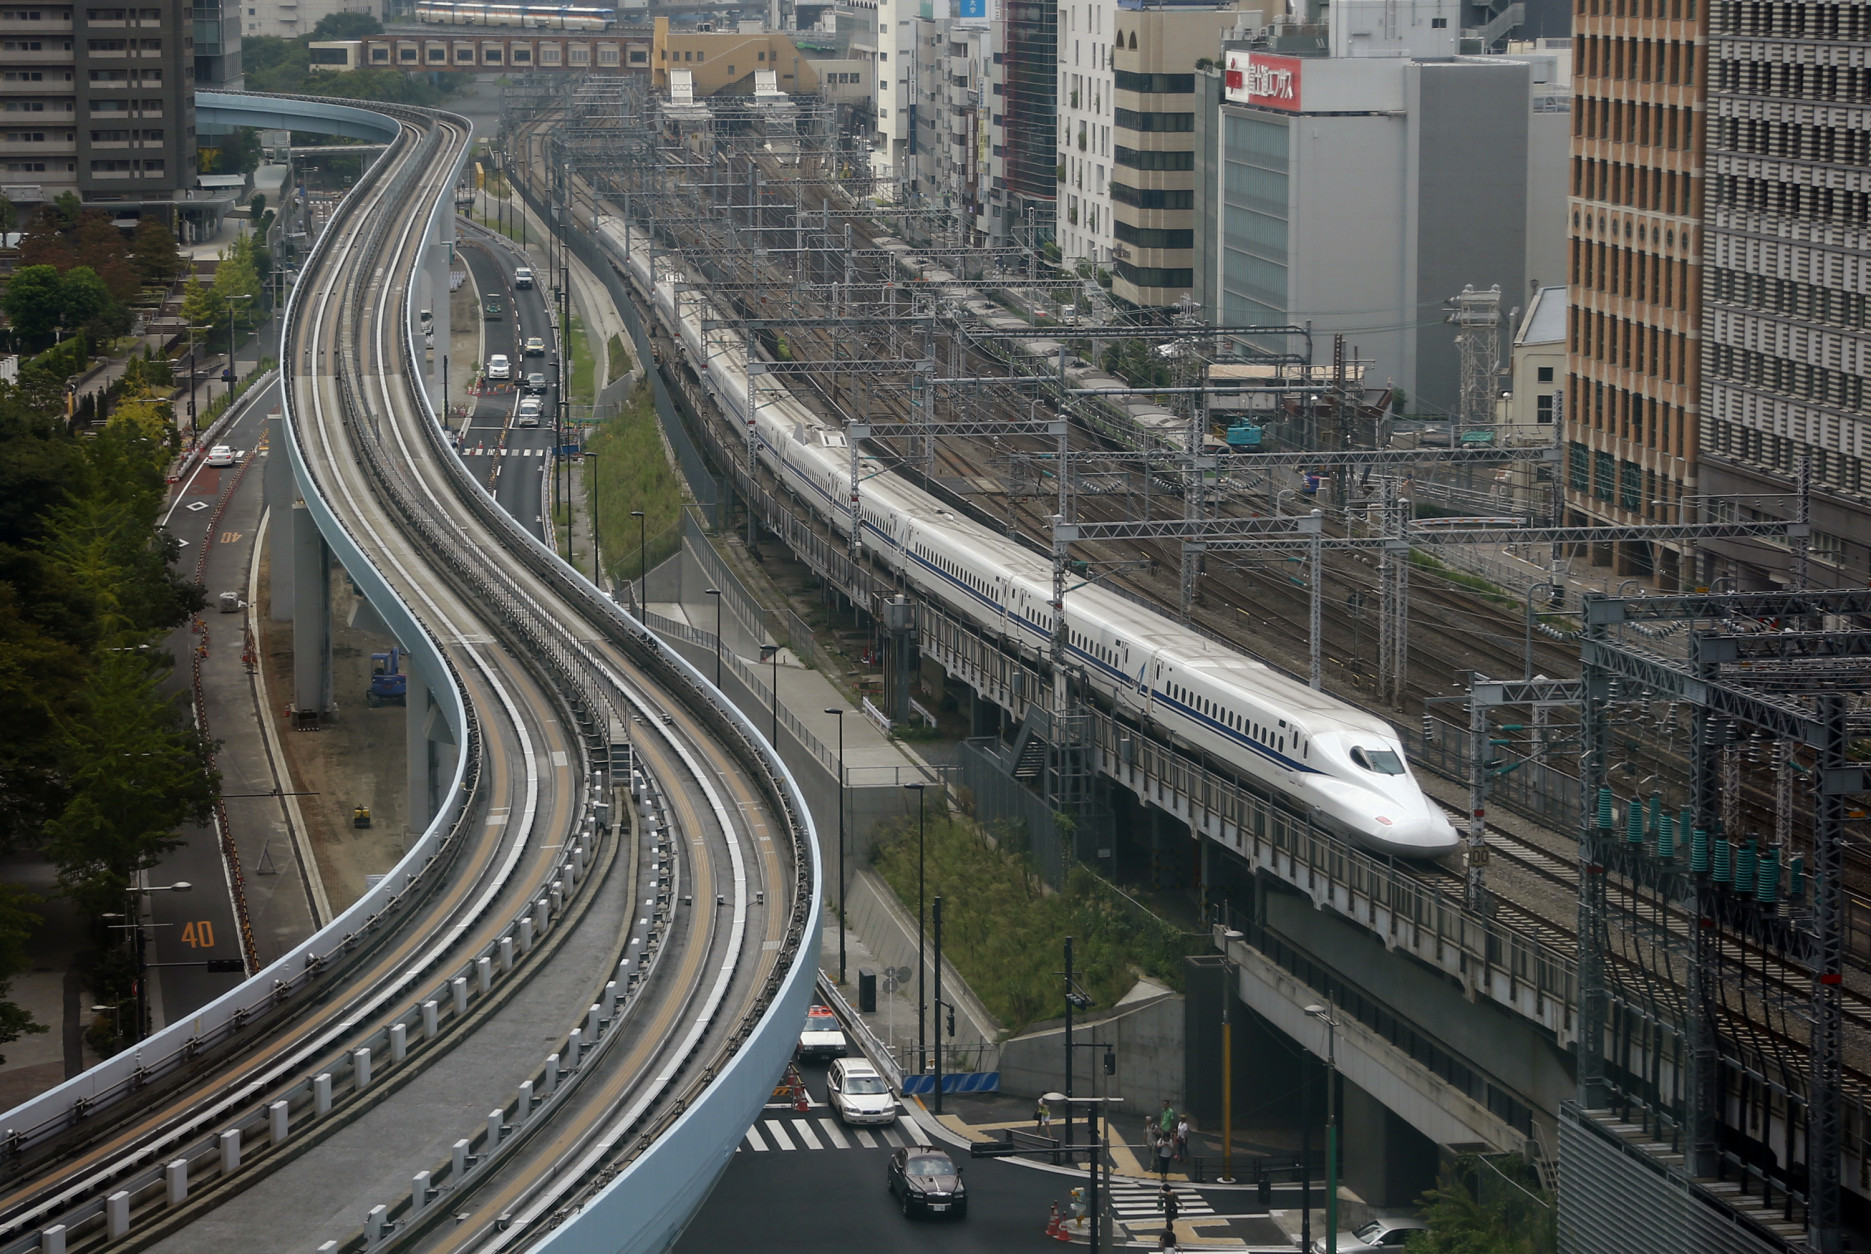 In this Sept. 24, 2014 photo, a Shinkansen bullet train heads for Tokyo Station on the Tokaido Main Line in Tokyo. Japan launched its bullet train between Tokyo and Osaka 50 years ago Wednesday, Oct. 1, 2014. (AP Photo/Shizuo Kambayashi)